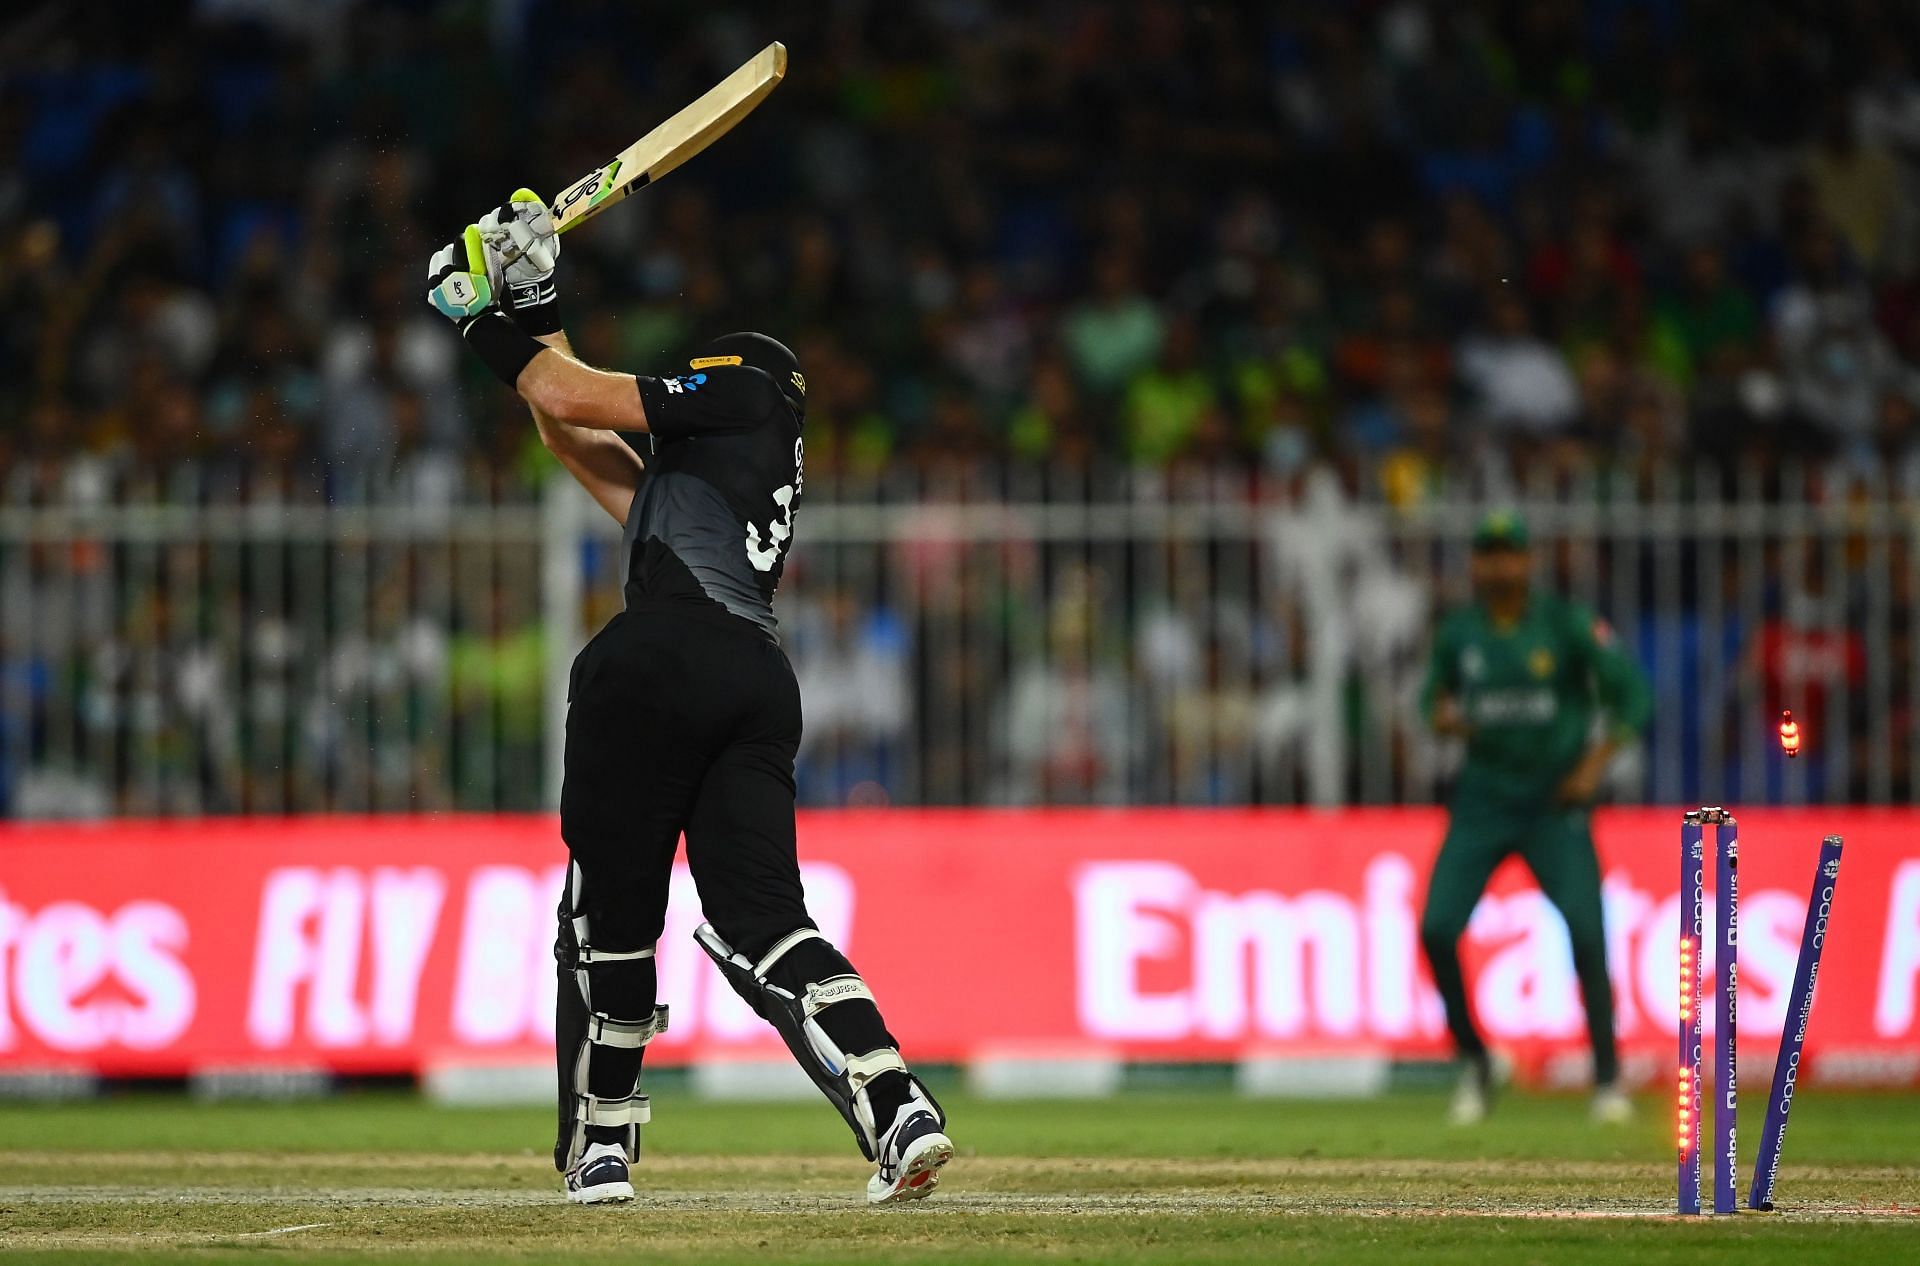 Martin Guptill of New Zealand is bowled by Haris Rauf of Pakistan. Pic: Getty Images